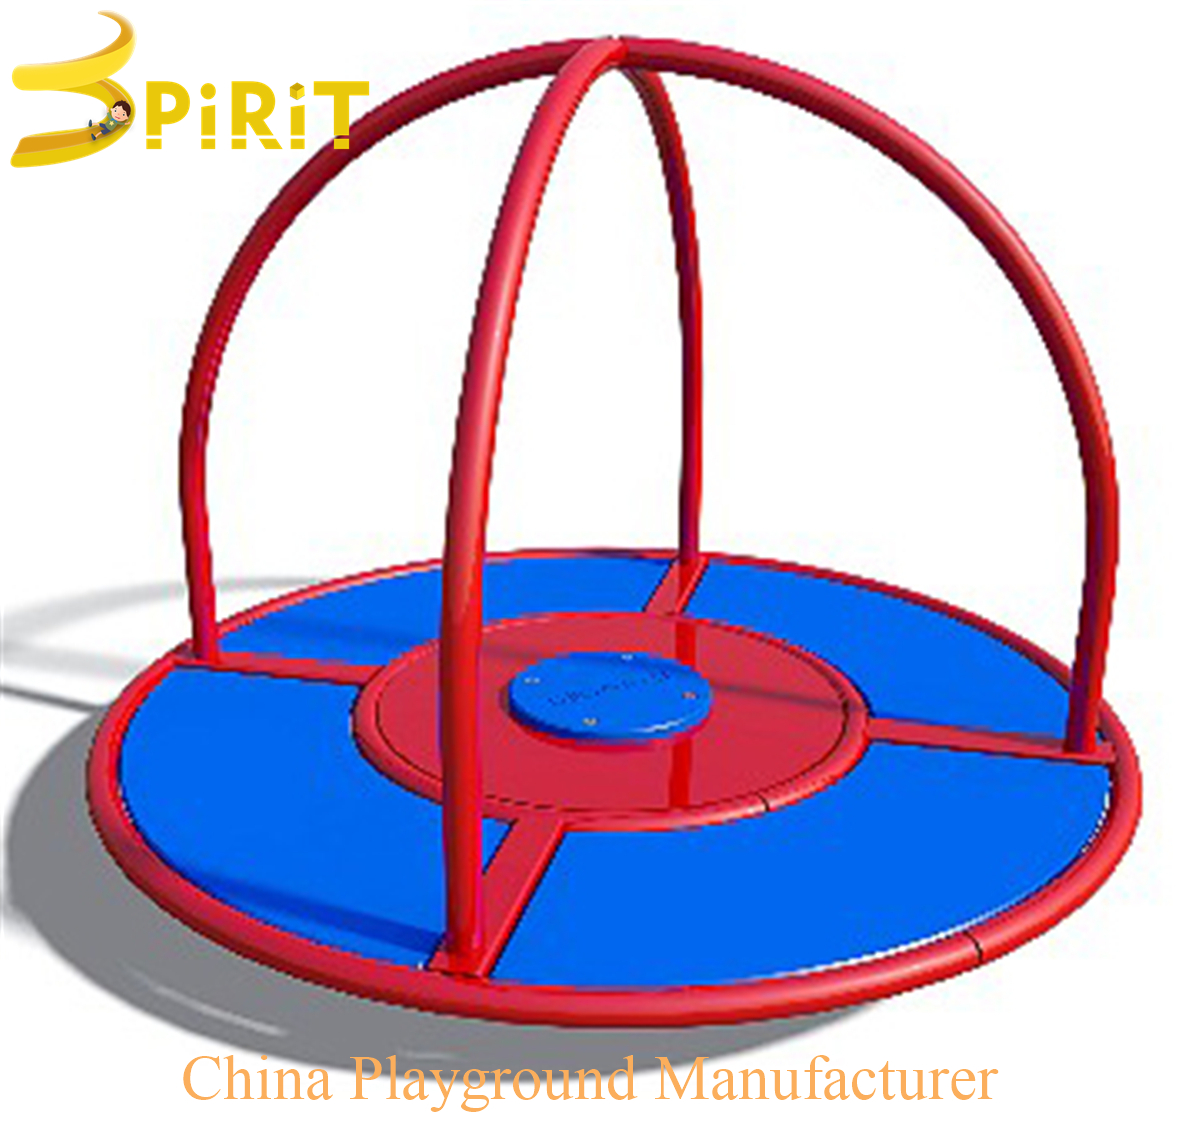 Commercial outdoor playground sensory toys-SPIRIT PLAY,Outdoor Playground, Indoor Playground,Trampoline Park,Outdoor Fitness,Inflatable,Soft Playground,Ninja Warrior,Trampoline Park,Playground Structure,Play Structure,Outdoor Fitness,Water Park,Play System,Freestanding,Interactive,independente ,Inklusibo, Park, Pagsaka sa Bungbong, Dula sa Bata